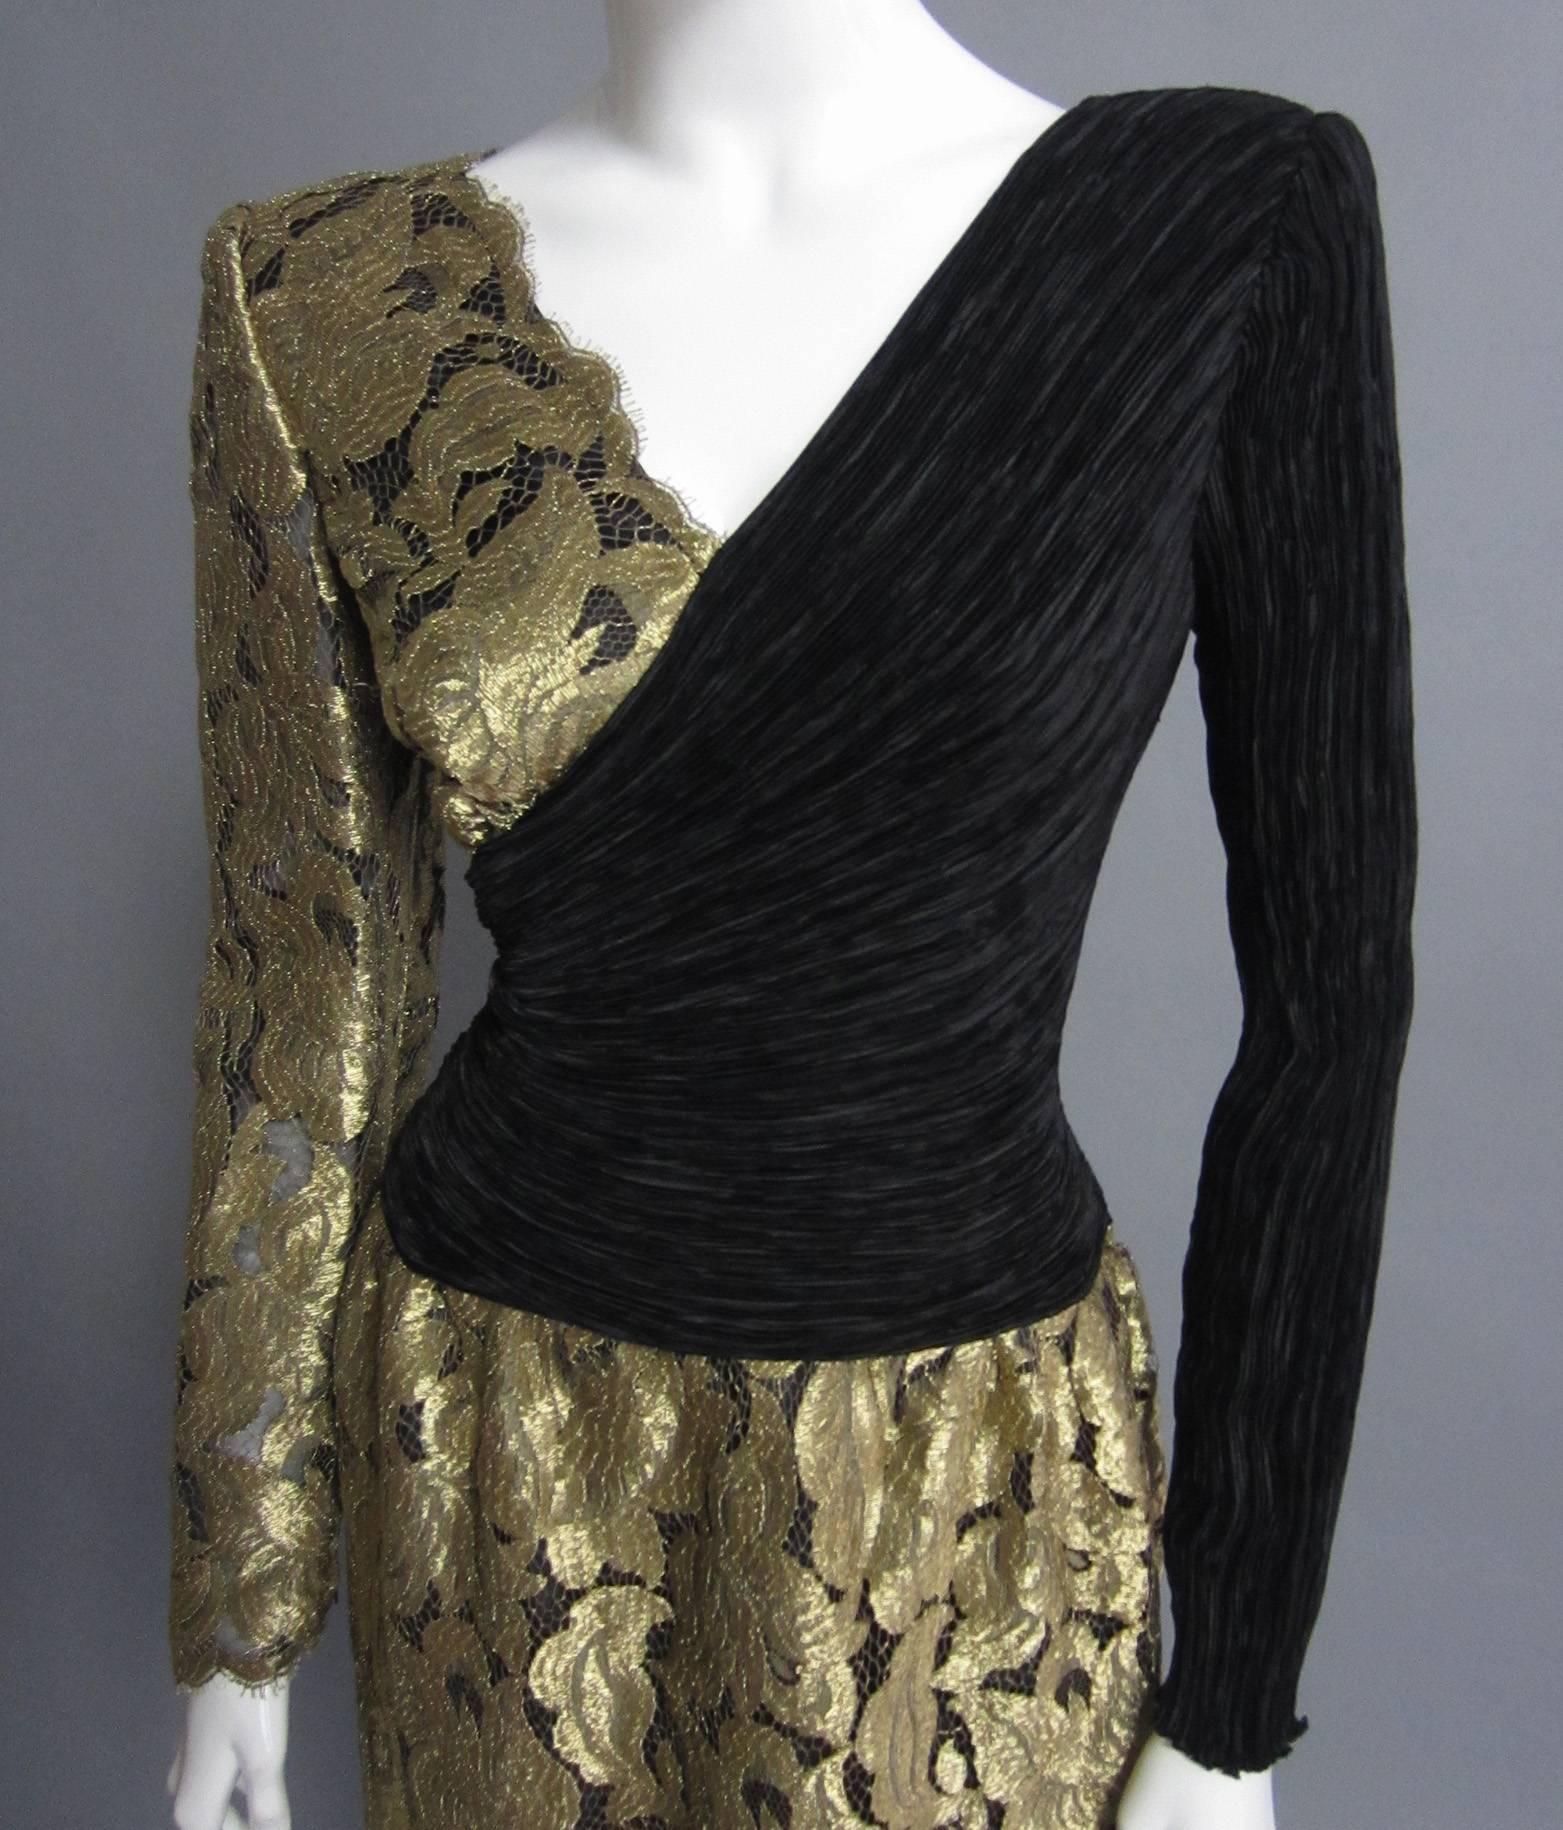 A gorgeous dress from designer MARY MCFADDEN, this dress is predominantly made of gold, ornate lace. The fuller skirt is lined with a dark layer of stiff chiffon and organza; this provides coverage while also creating structure. The top is split;